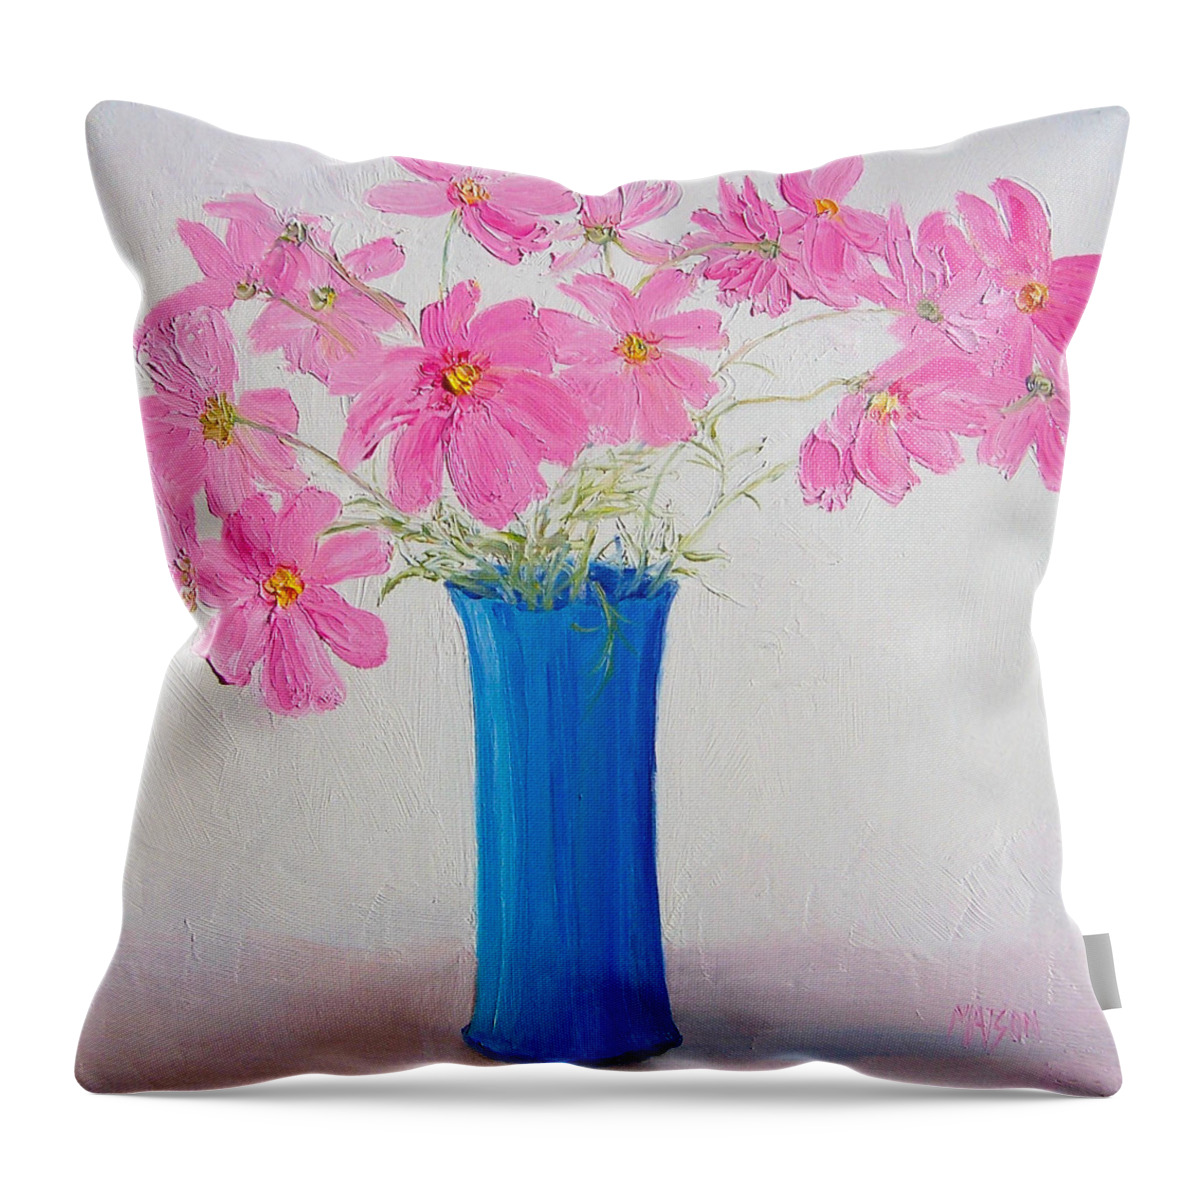 Cosmos Flowers Throw Pillow featuring the painting Cosmos flowers by Jan Matson